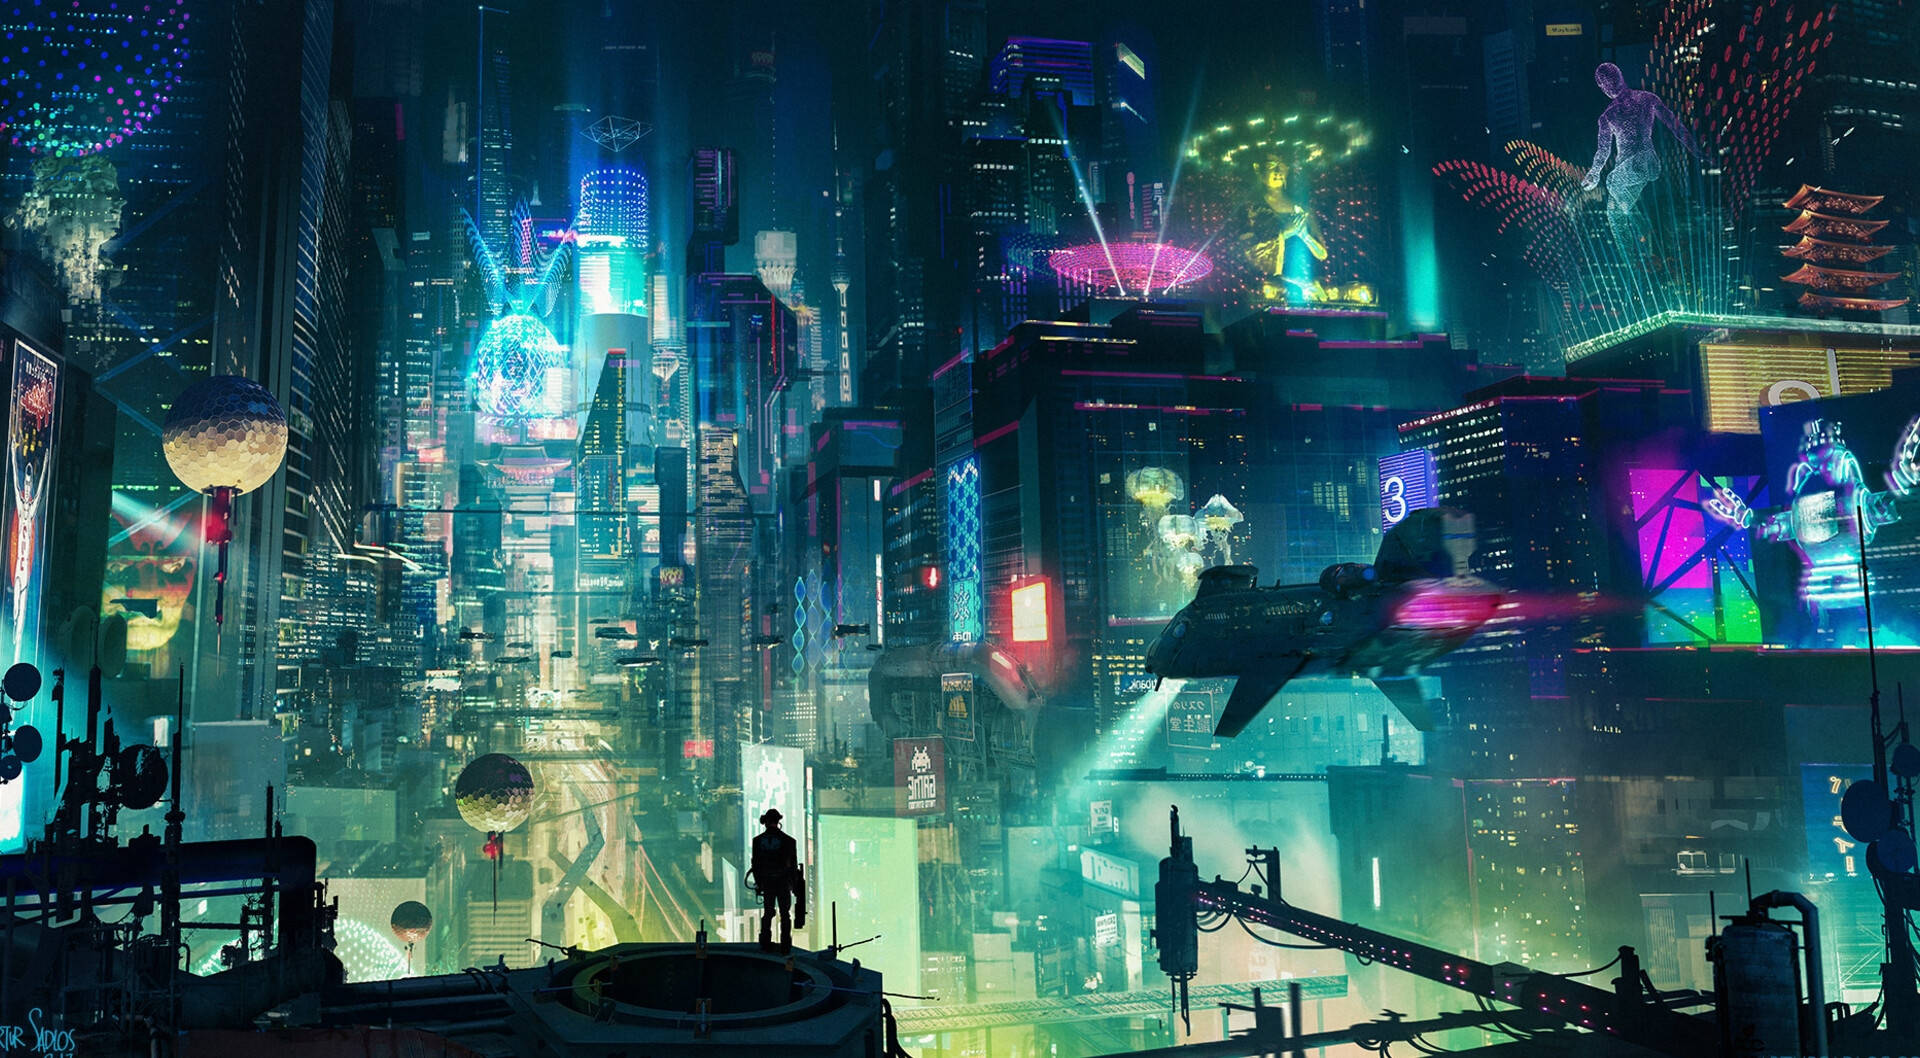 "Welcome to the future age of Cyberpunk" Wallpaper